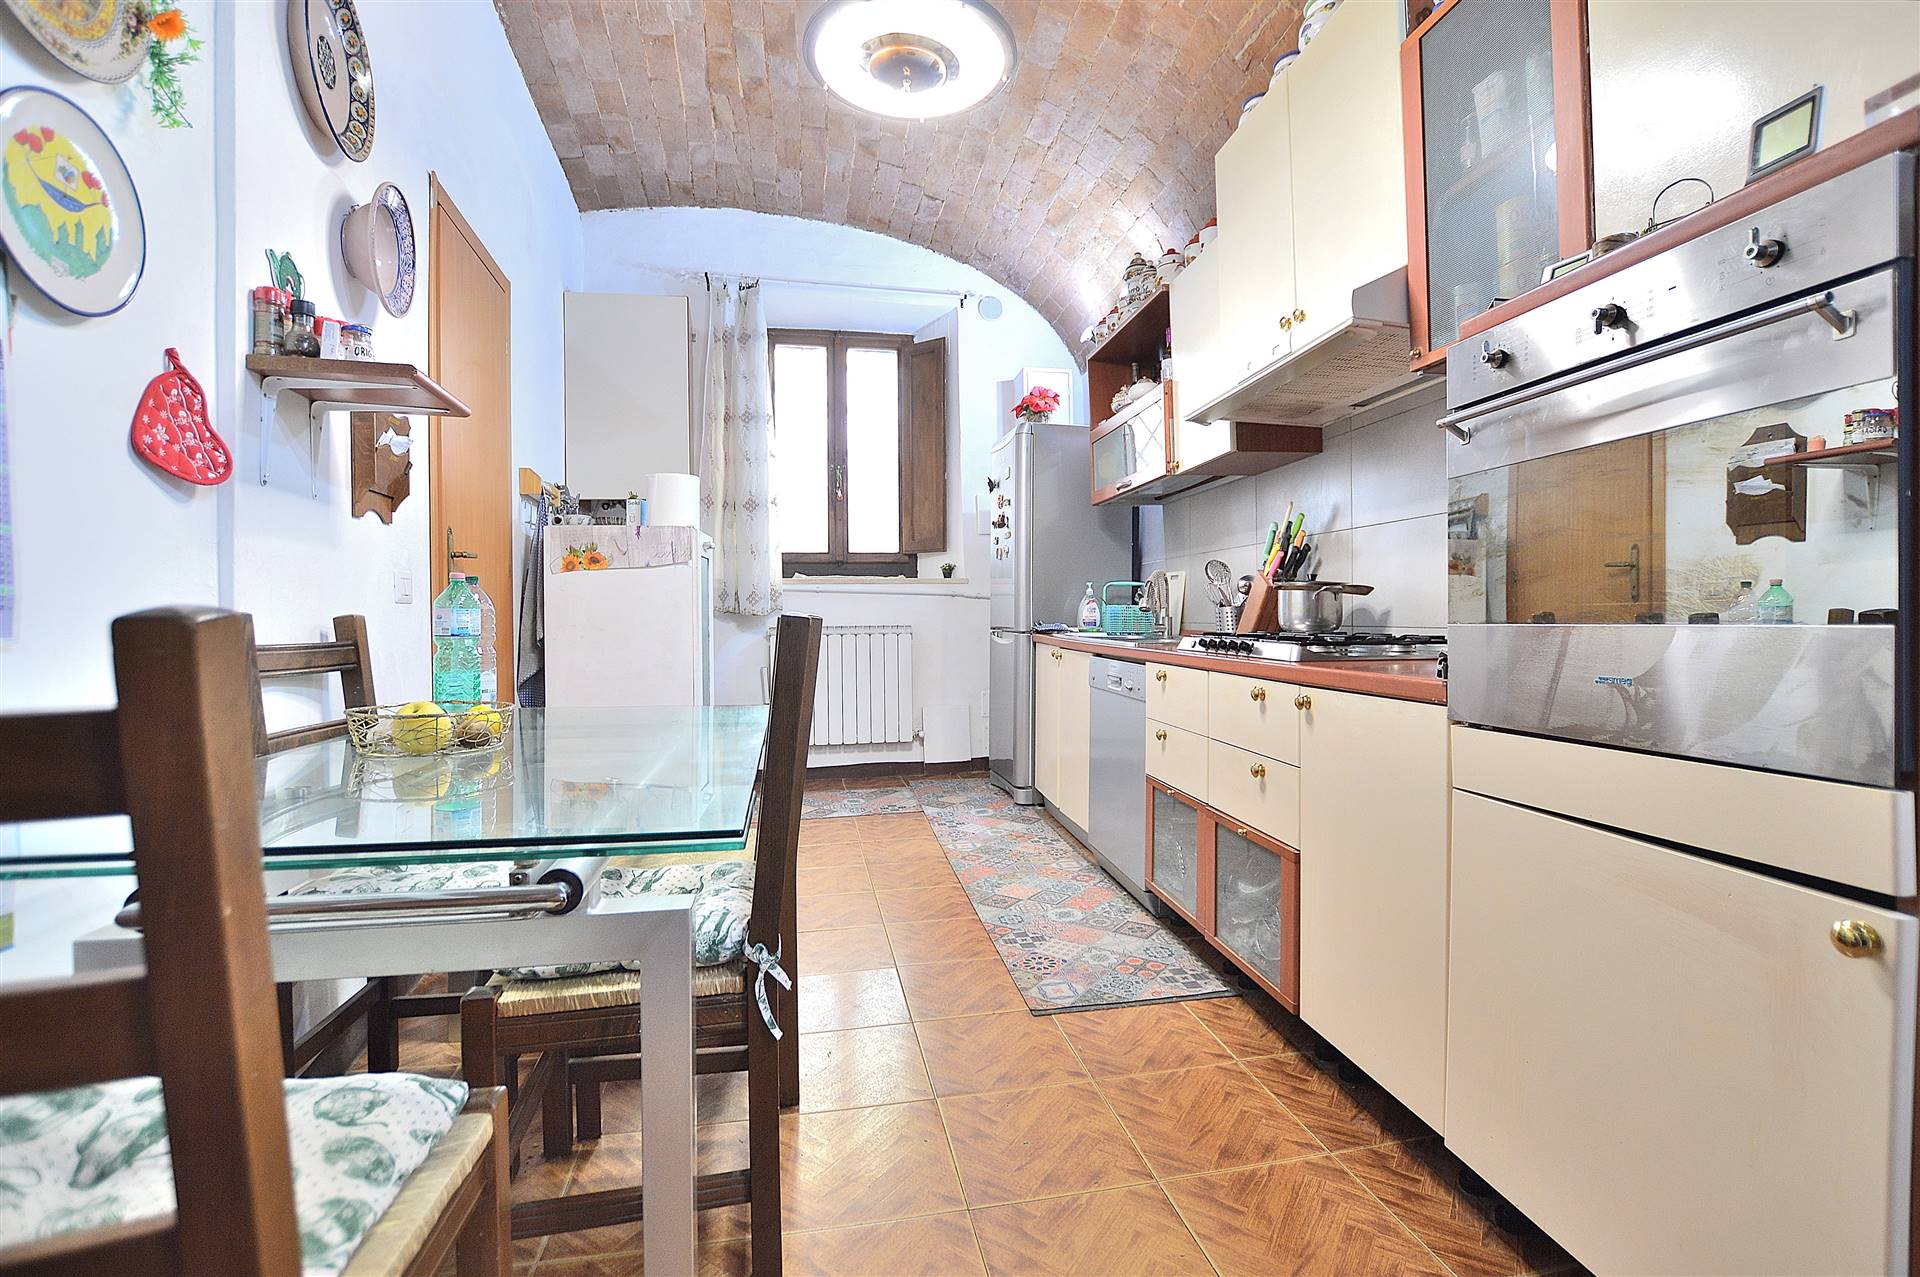 CENTRO - CONTRADA PANTERA, SIENA, Apartment for sale of 82 Sq. mt., Good condition, Heating Individual heating system, Energetic class: G, Epi: 175 kwh/m2 year, placed at Ground on 3, composed by: 3 